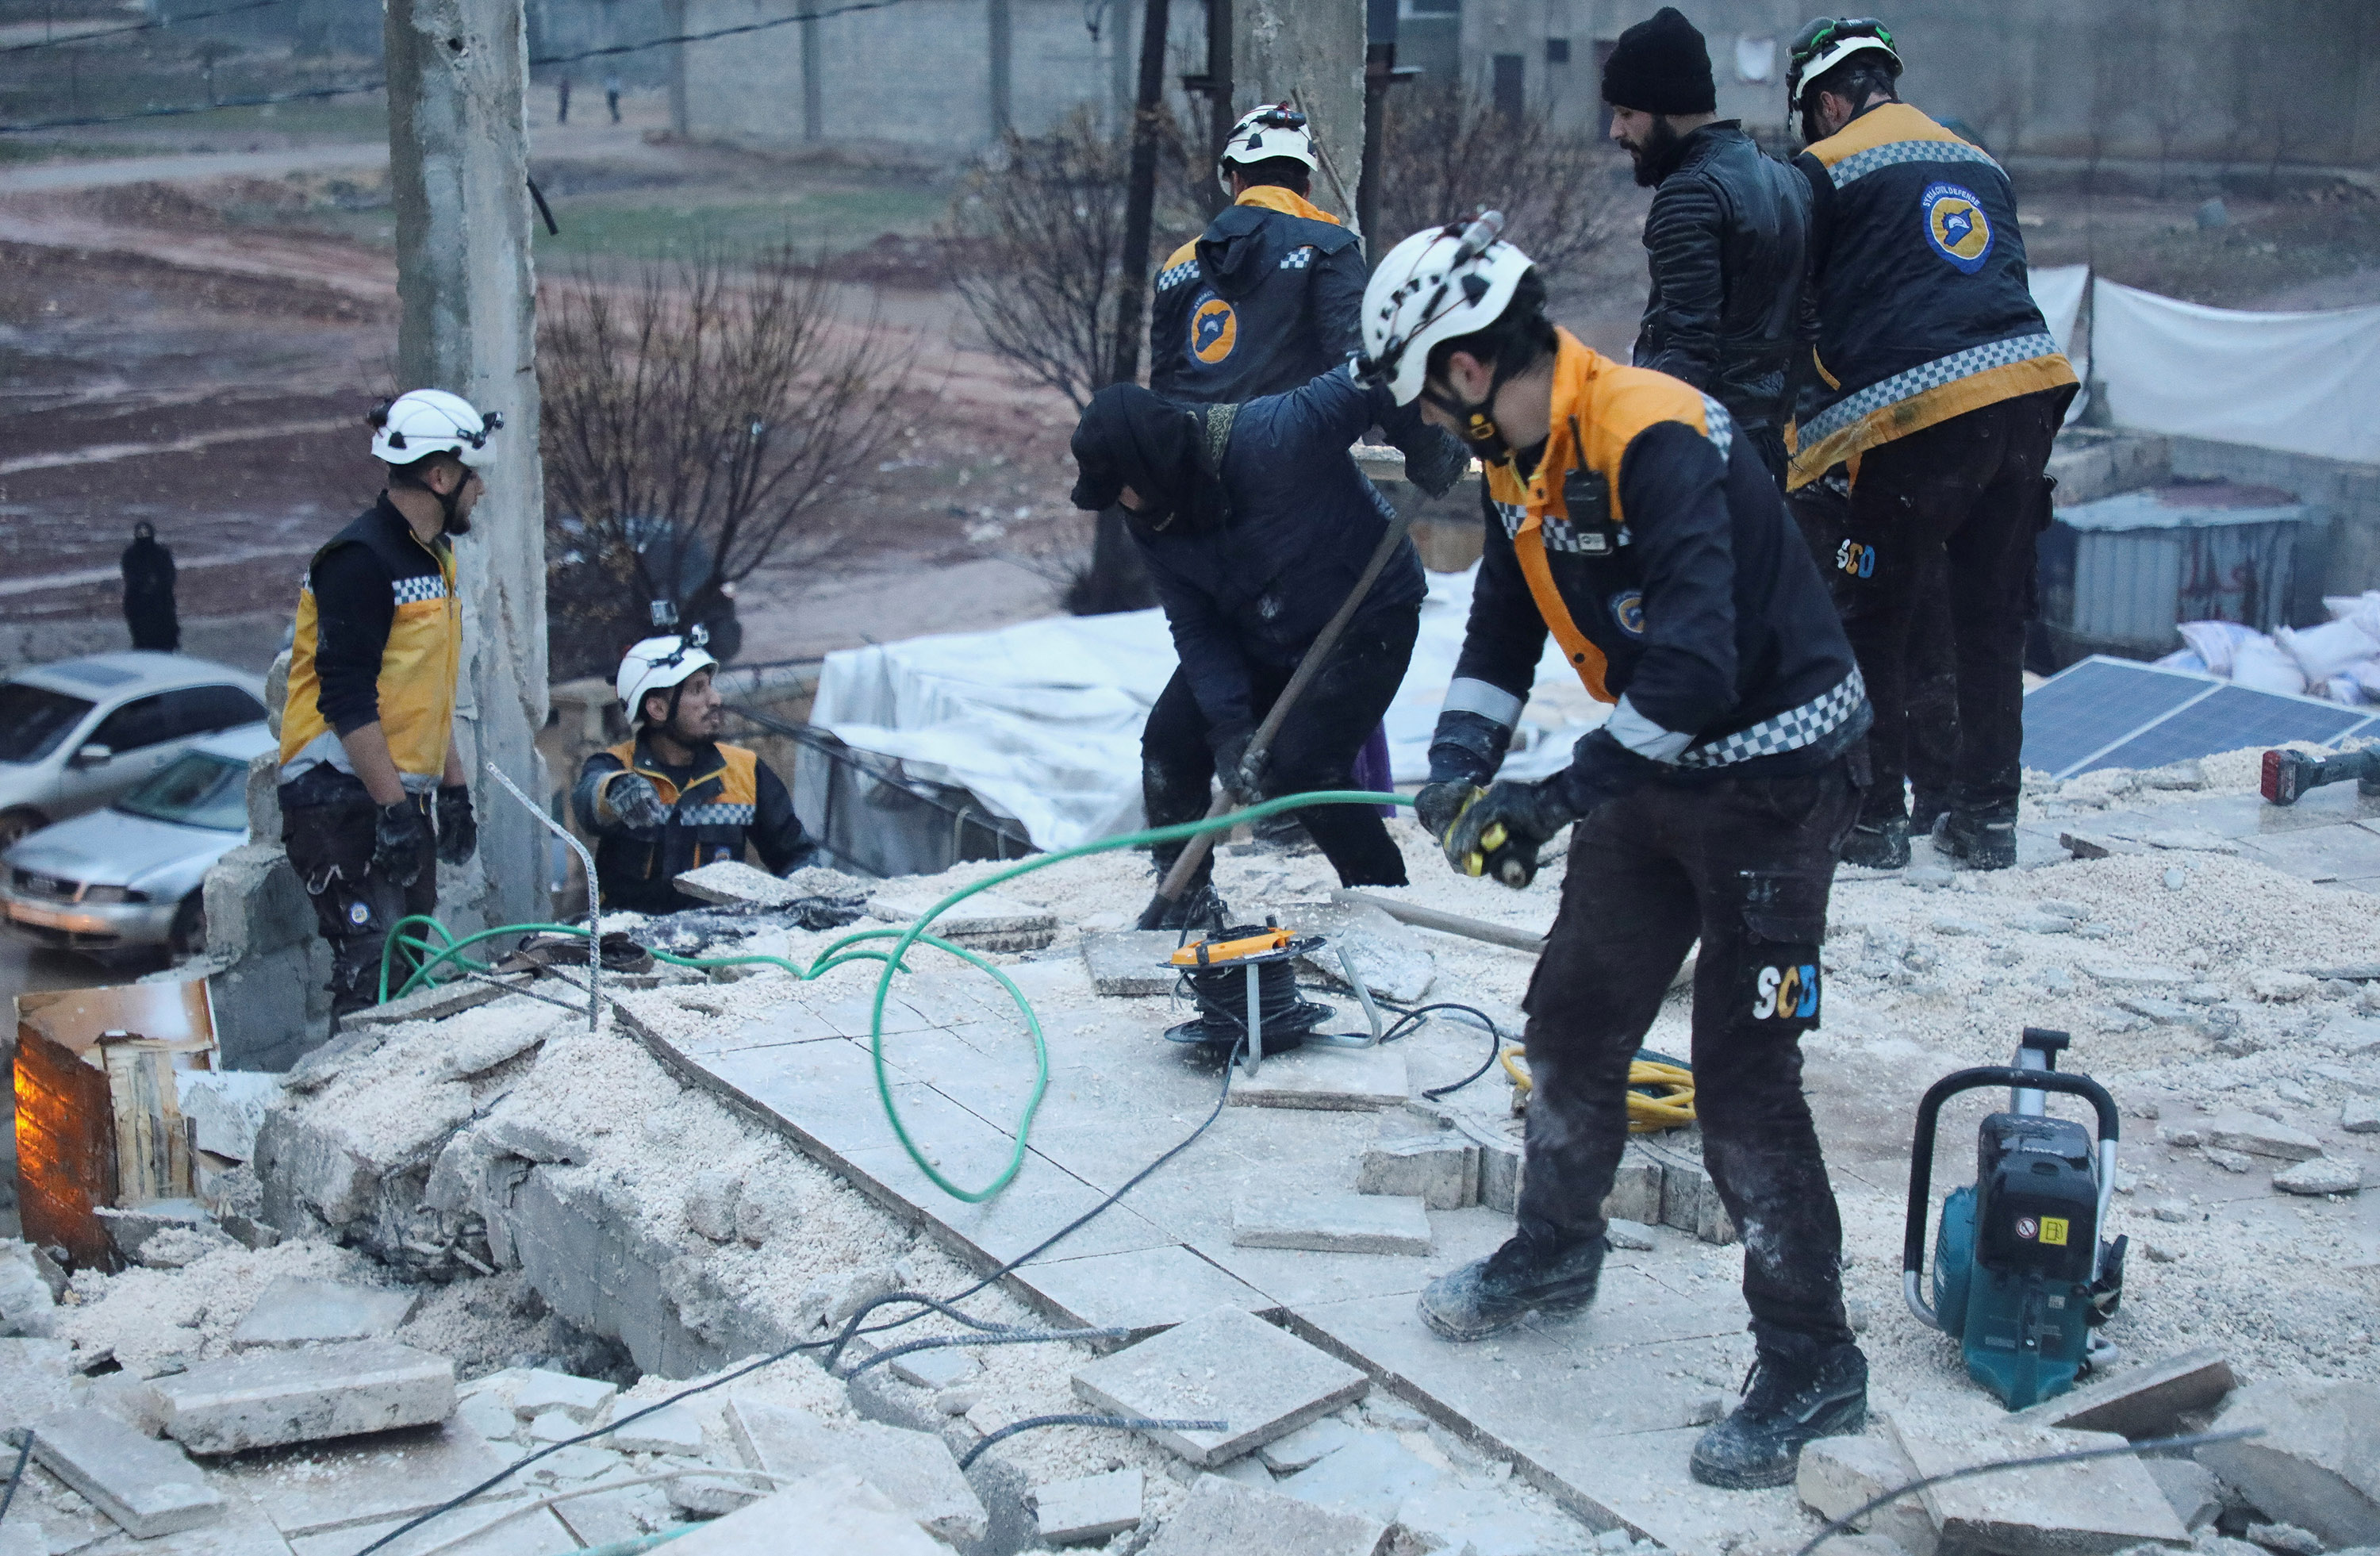 Rescuers work at the site of a damaged building, following an earthquake in Syria, on February 6.